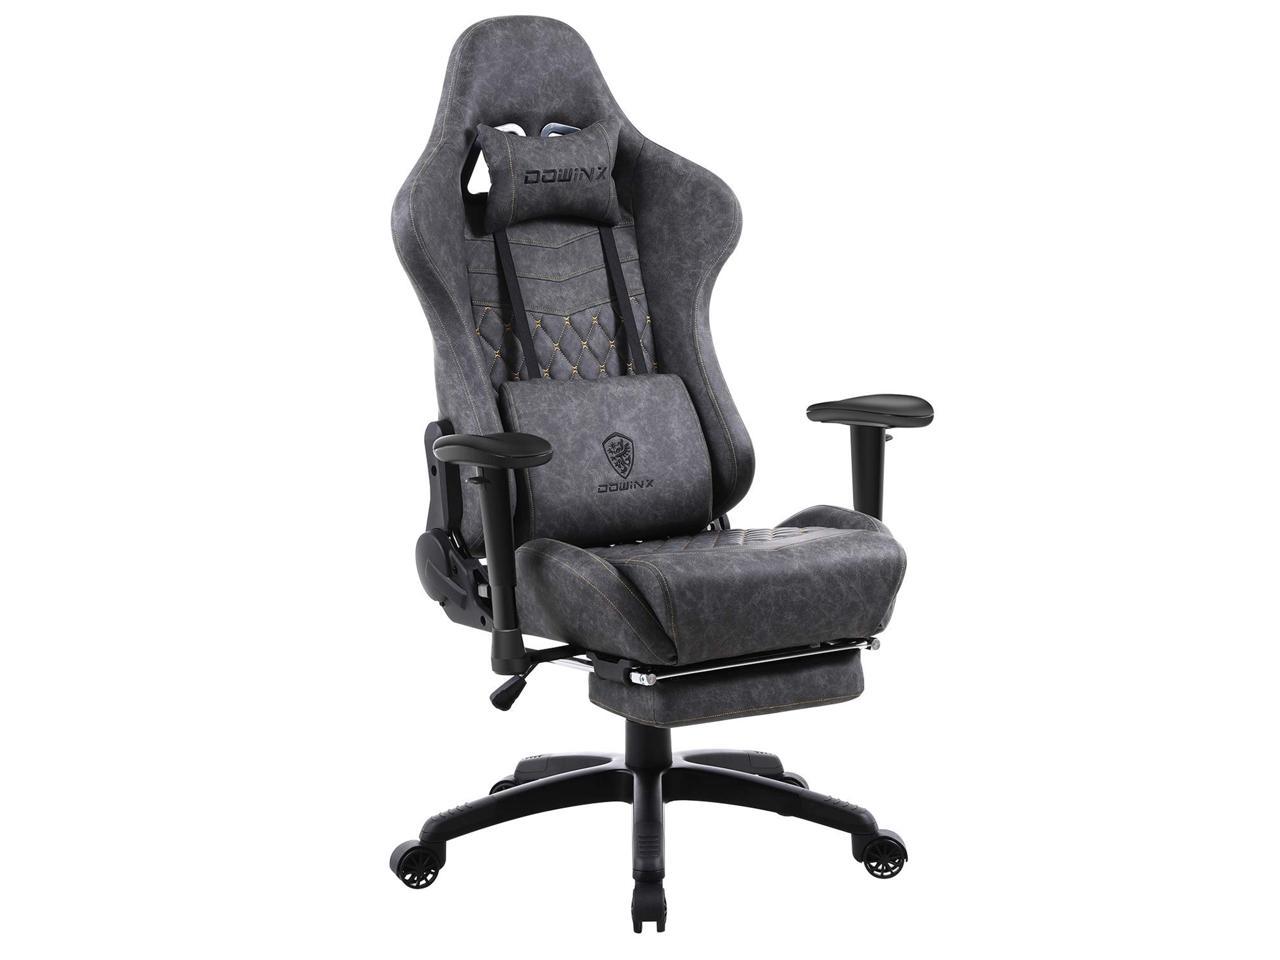 Dowinx Gaming Chair Ergonomic Retro Style Recliner with